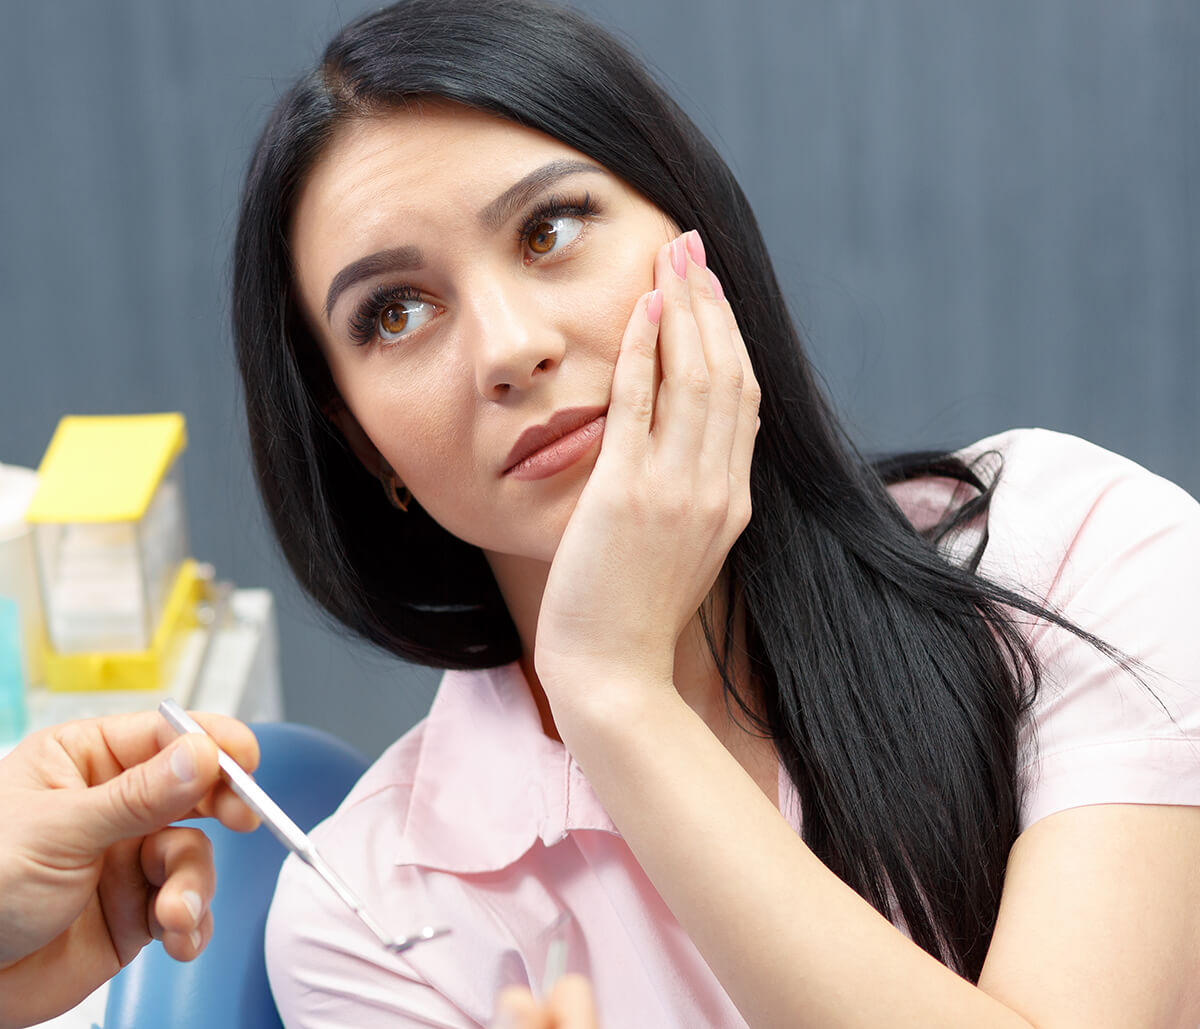 Avoid the Pain, Trouble of Wisdom Tooth Complications with Proactive Monitoring, Removal in Fort Worth, TX Area